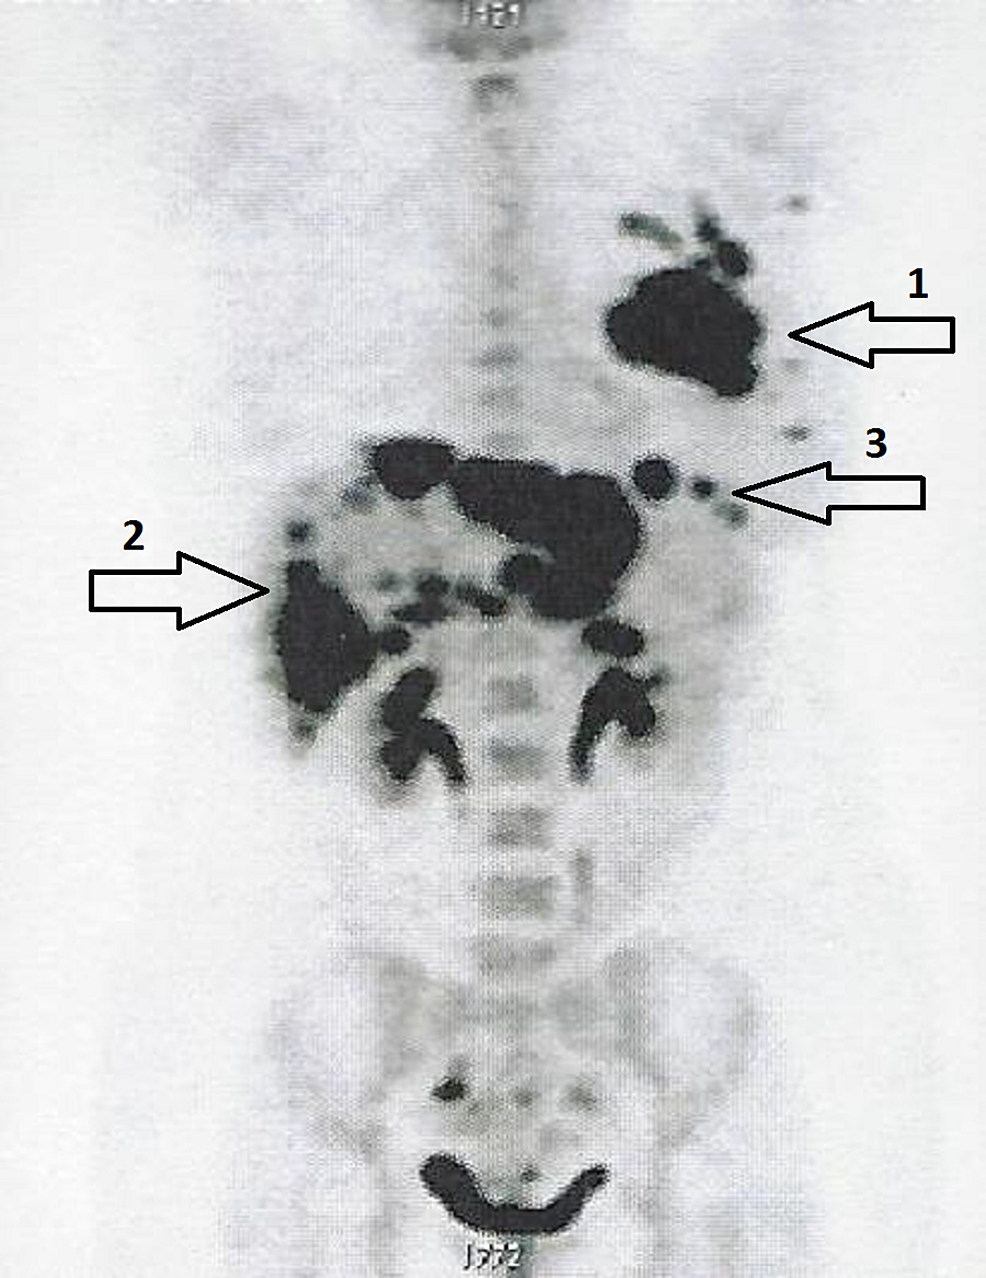 Whole-body-(18F)-FDG-PET-CT-scan-showing-a-77-mm-x-55-mm-primary-tumor-in-the-left-breast-(arrow-1),-multiple-widespread-liver-masses-(arrow-2),-and-an-upper-left-nodular-abdominal-lesion-(arrow-3).